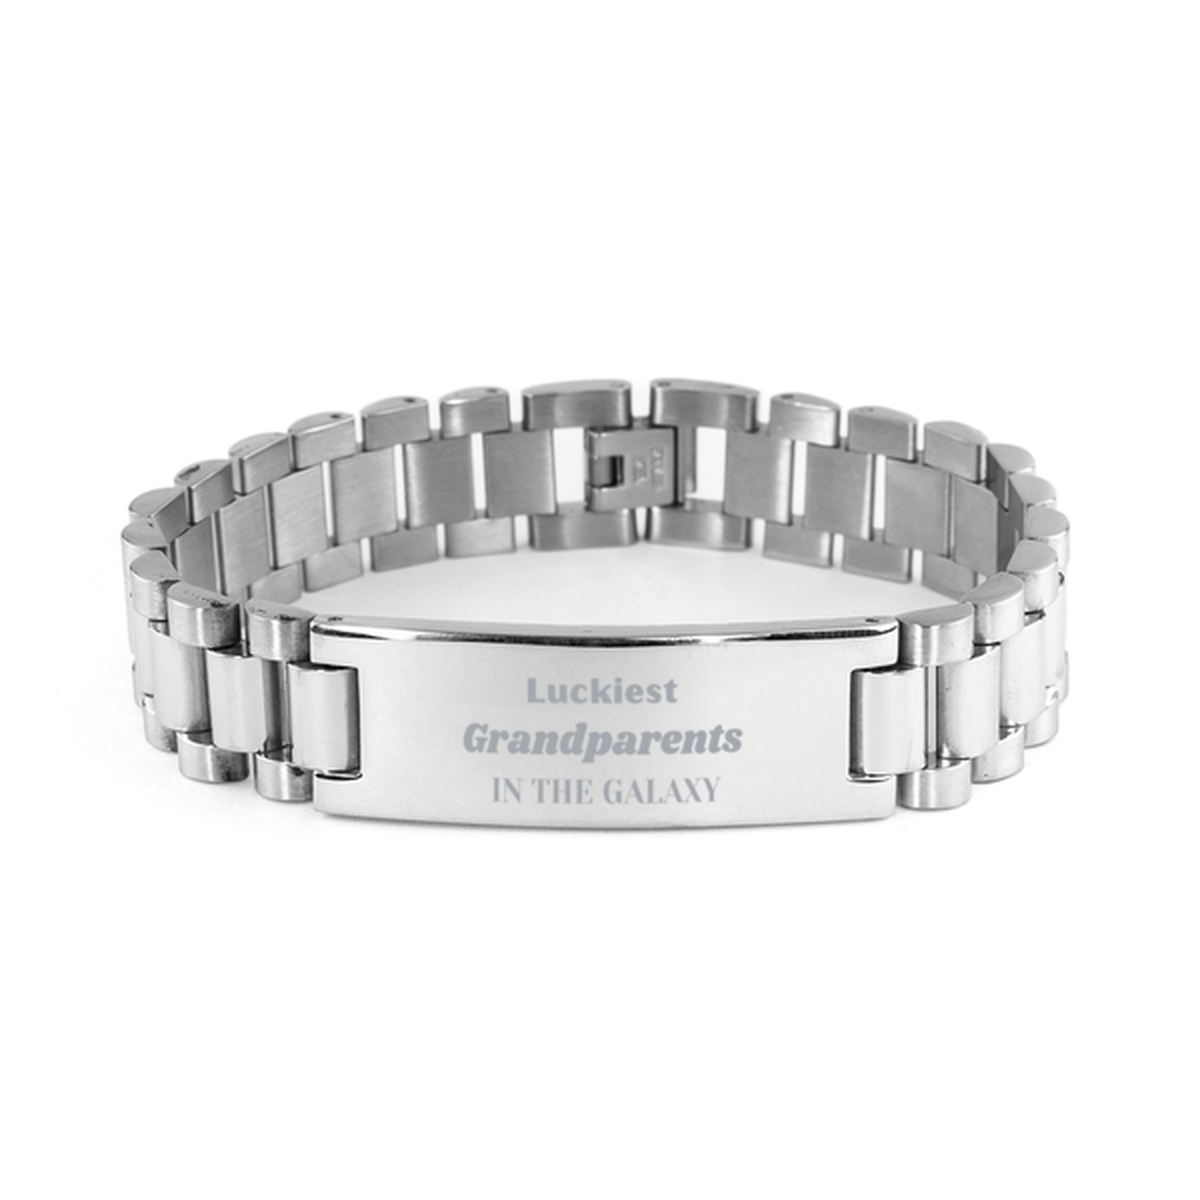 Luckiest Grandparents in the Galaxy, To My Grandparents Engraved Gifts, Christmas Grandparents Ladder Stainless Steel Bracelet Gifts, X-mas Birthday Unique Gifts For Grandparents Men Women